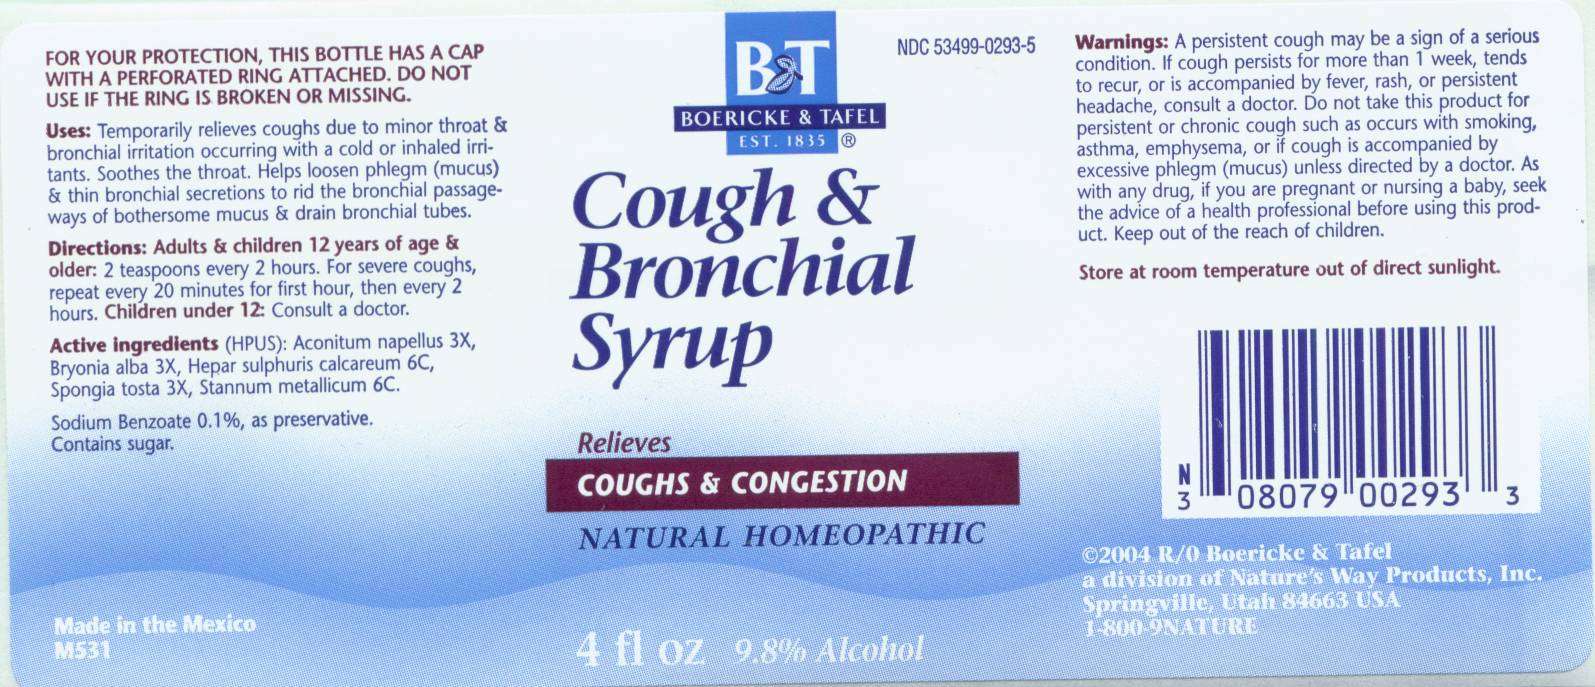 Cough and Bronchial